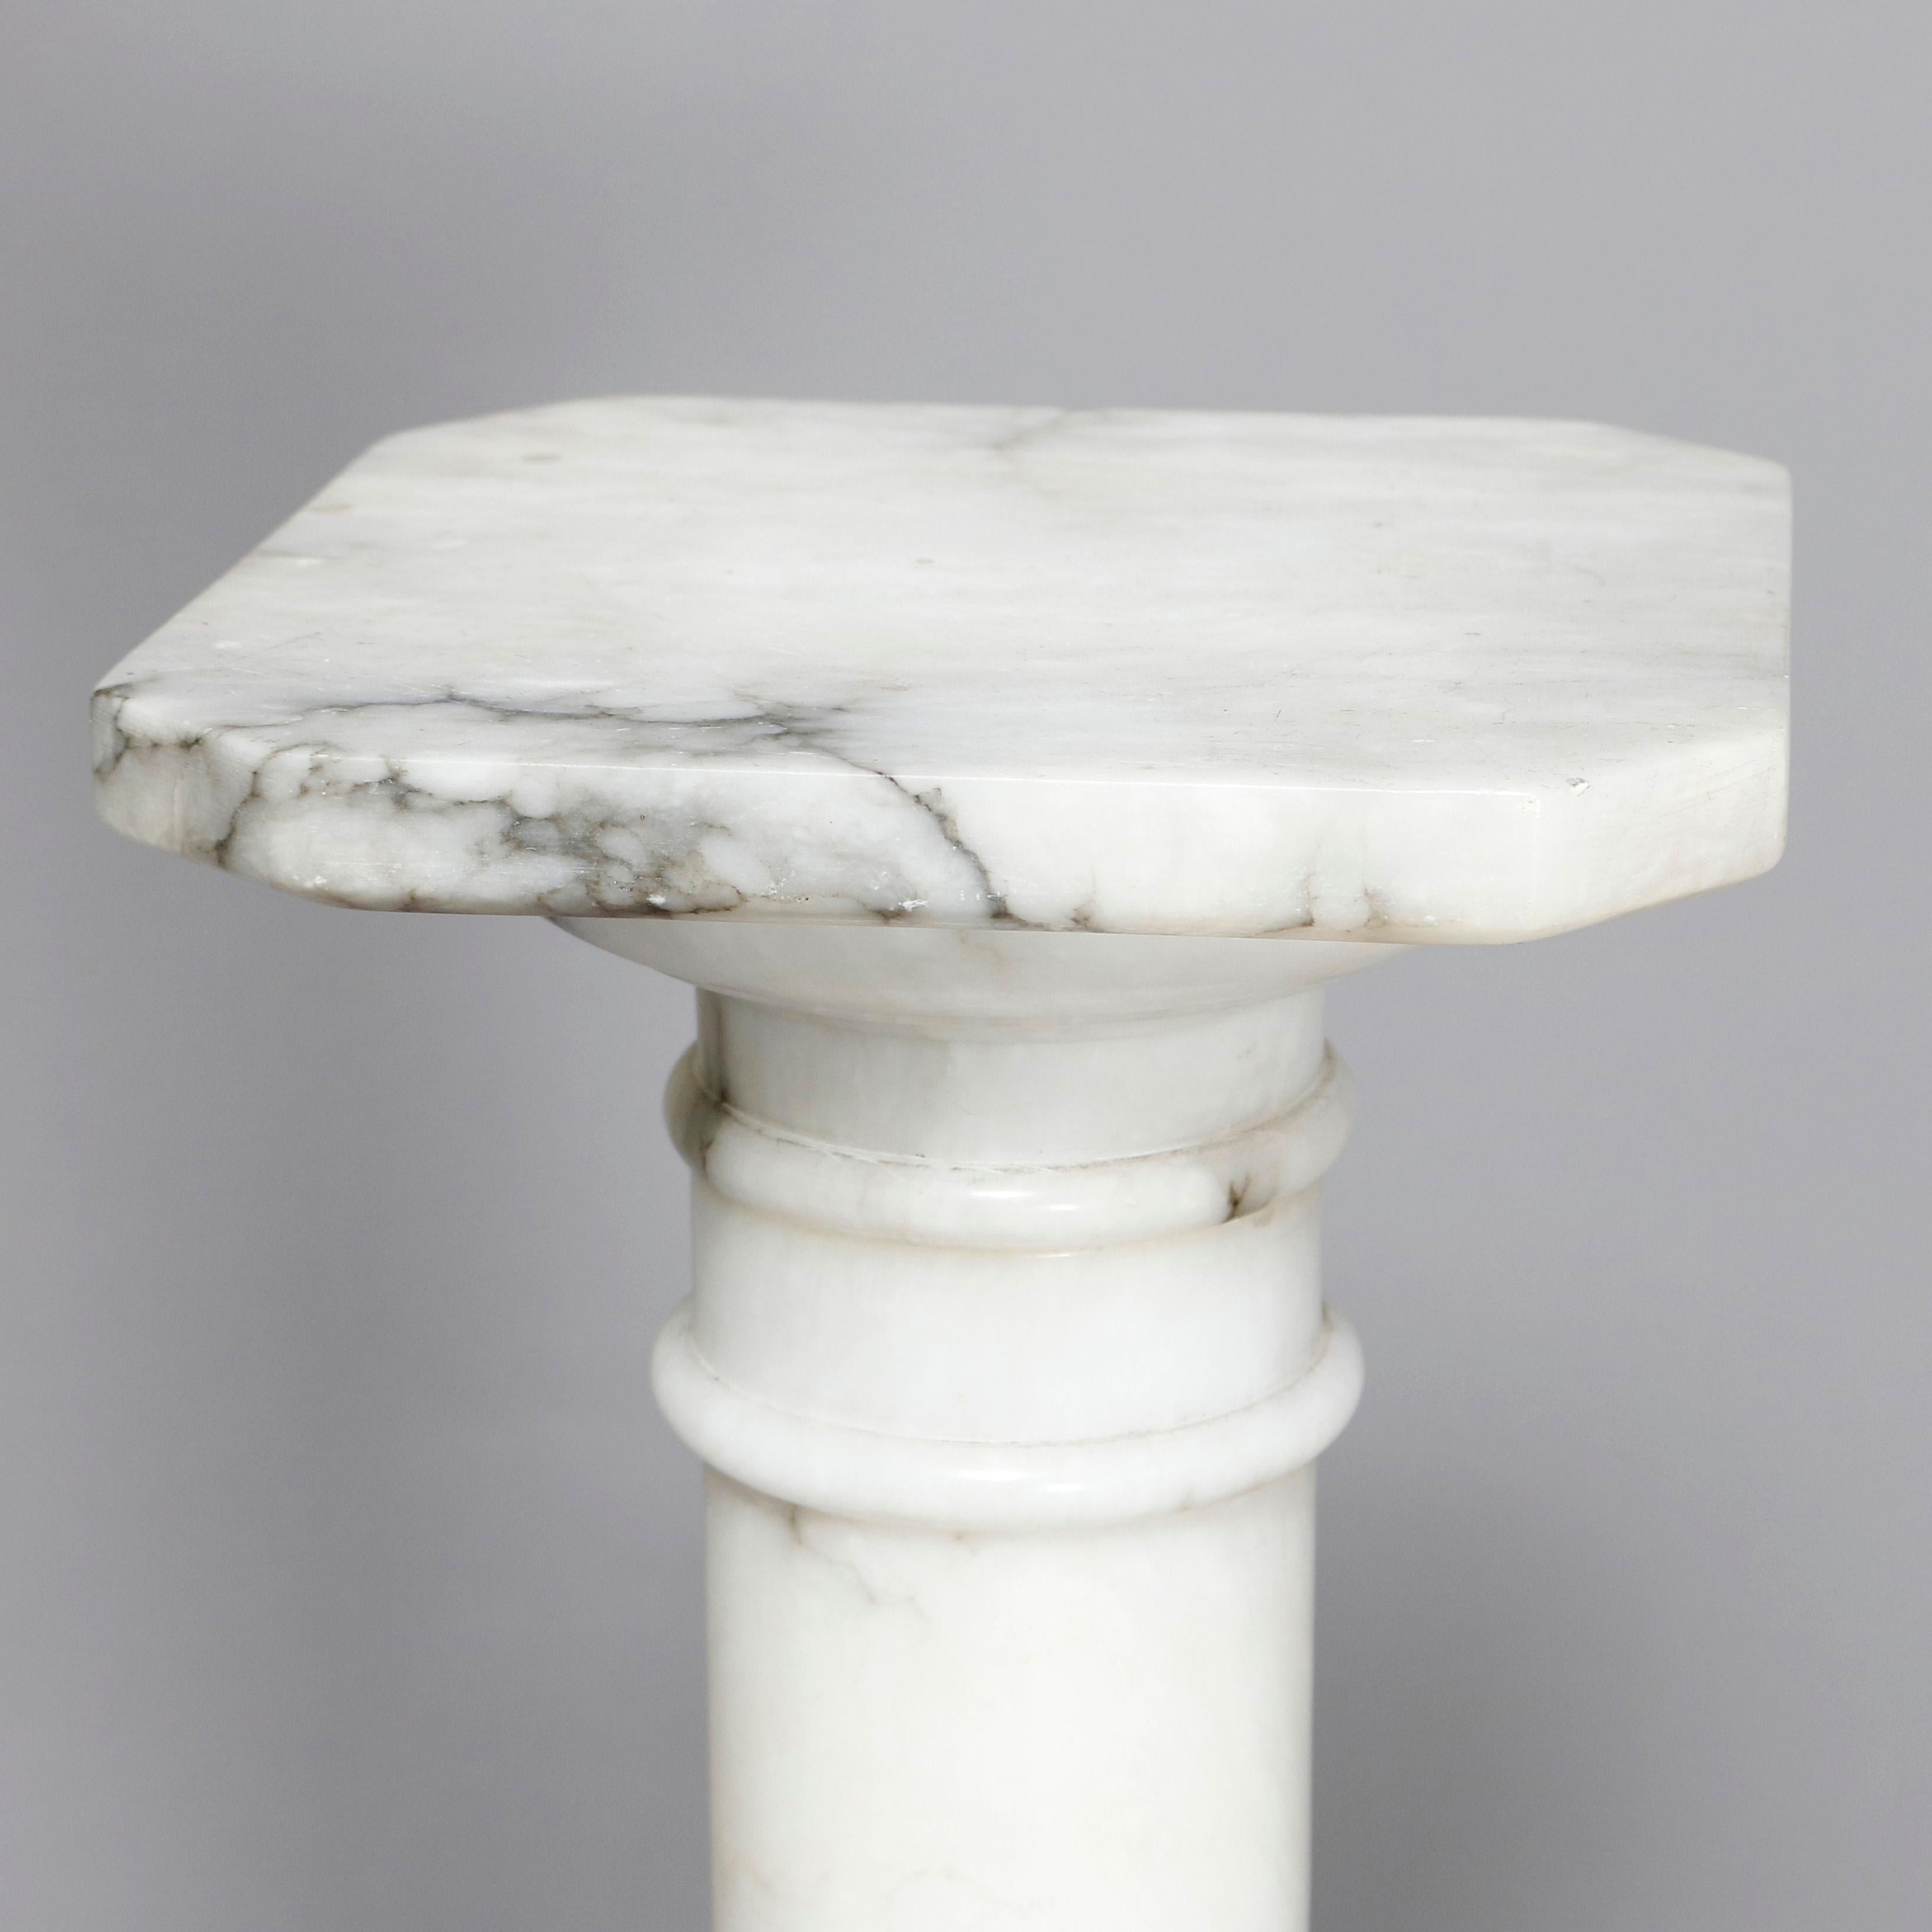 An antique Classical Italian carved marble sculpture pedestal offers Doric column-form with octagonal and stepped base and clipped corner display, 20th century

Measures: 35